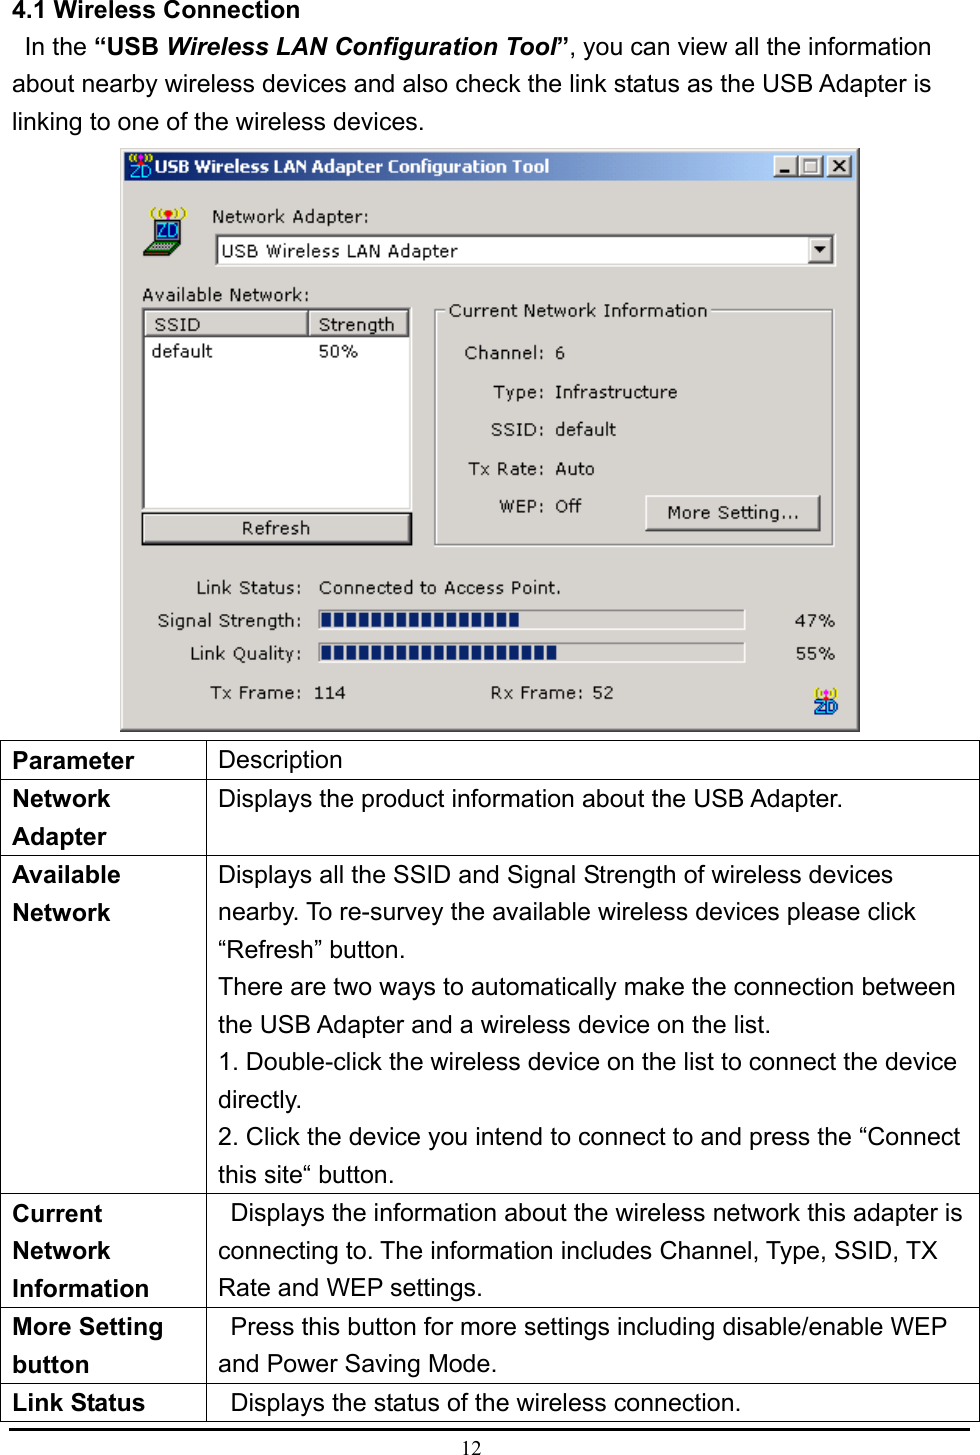  12  4.1 Wireless Connection    In the “USB Wireless LAN Configuration Tool”, you can view all the information about nearby wireless devices and also check the link status as the USB Adapter is linking to one of the wireless devices.    Parameter   Description  Network Adapter  Displays the product information about the USB Adapter.   Available Network  Displays all the SSID and Signal Strength of wireless devices nearby. To re-survey the available wireless devices please click “Refresh” button.   There are two ways to automatically make the connection between the USB Adapter and a wireless device on the list.   1. Double-click the wireless device on the list to connect the device directly.  2. Click the device you intend to connect to and press the “Connect this site“ button.   Current Network Information    Displays the information about the wireless network this adapter is connecting to. The information includes Channel, Type, SSID, TX Rate and WEP settings.   More Setting button    Press this button for more settings including disable/enable WEP and Power Saving Mode.   Link Status      Displays the status of the wireless connection.   